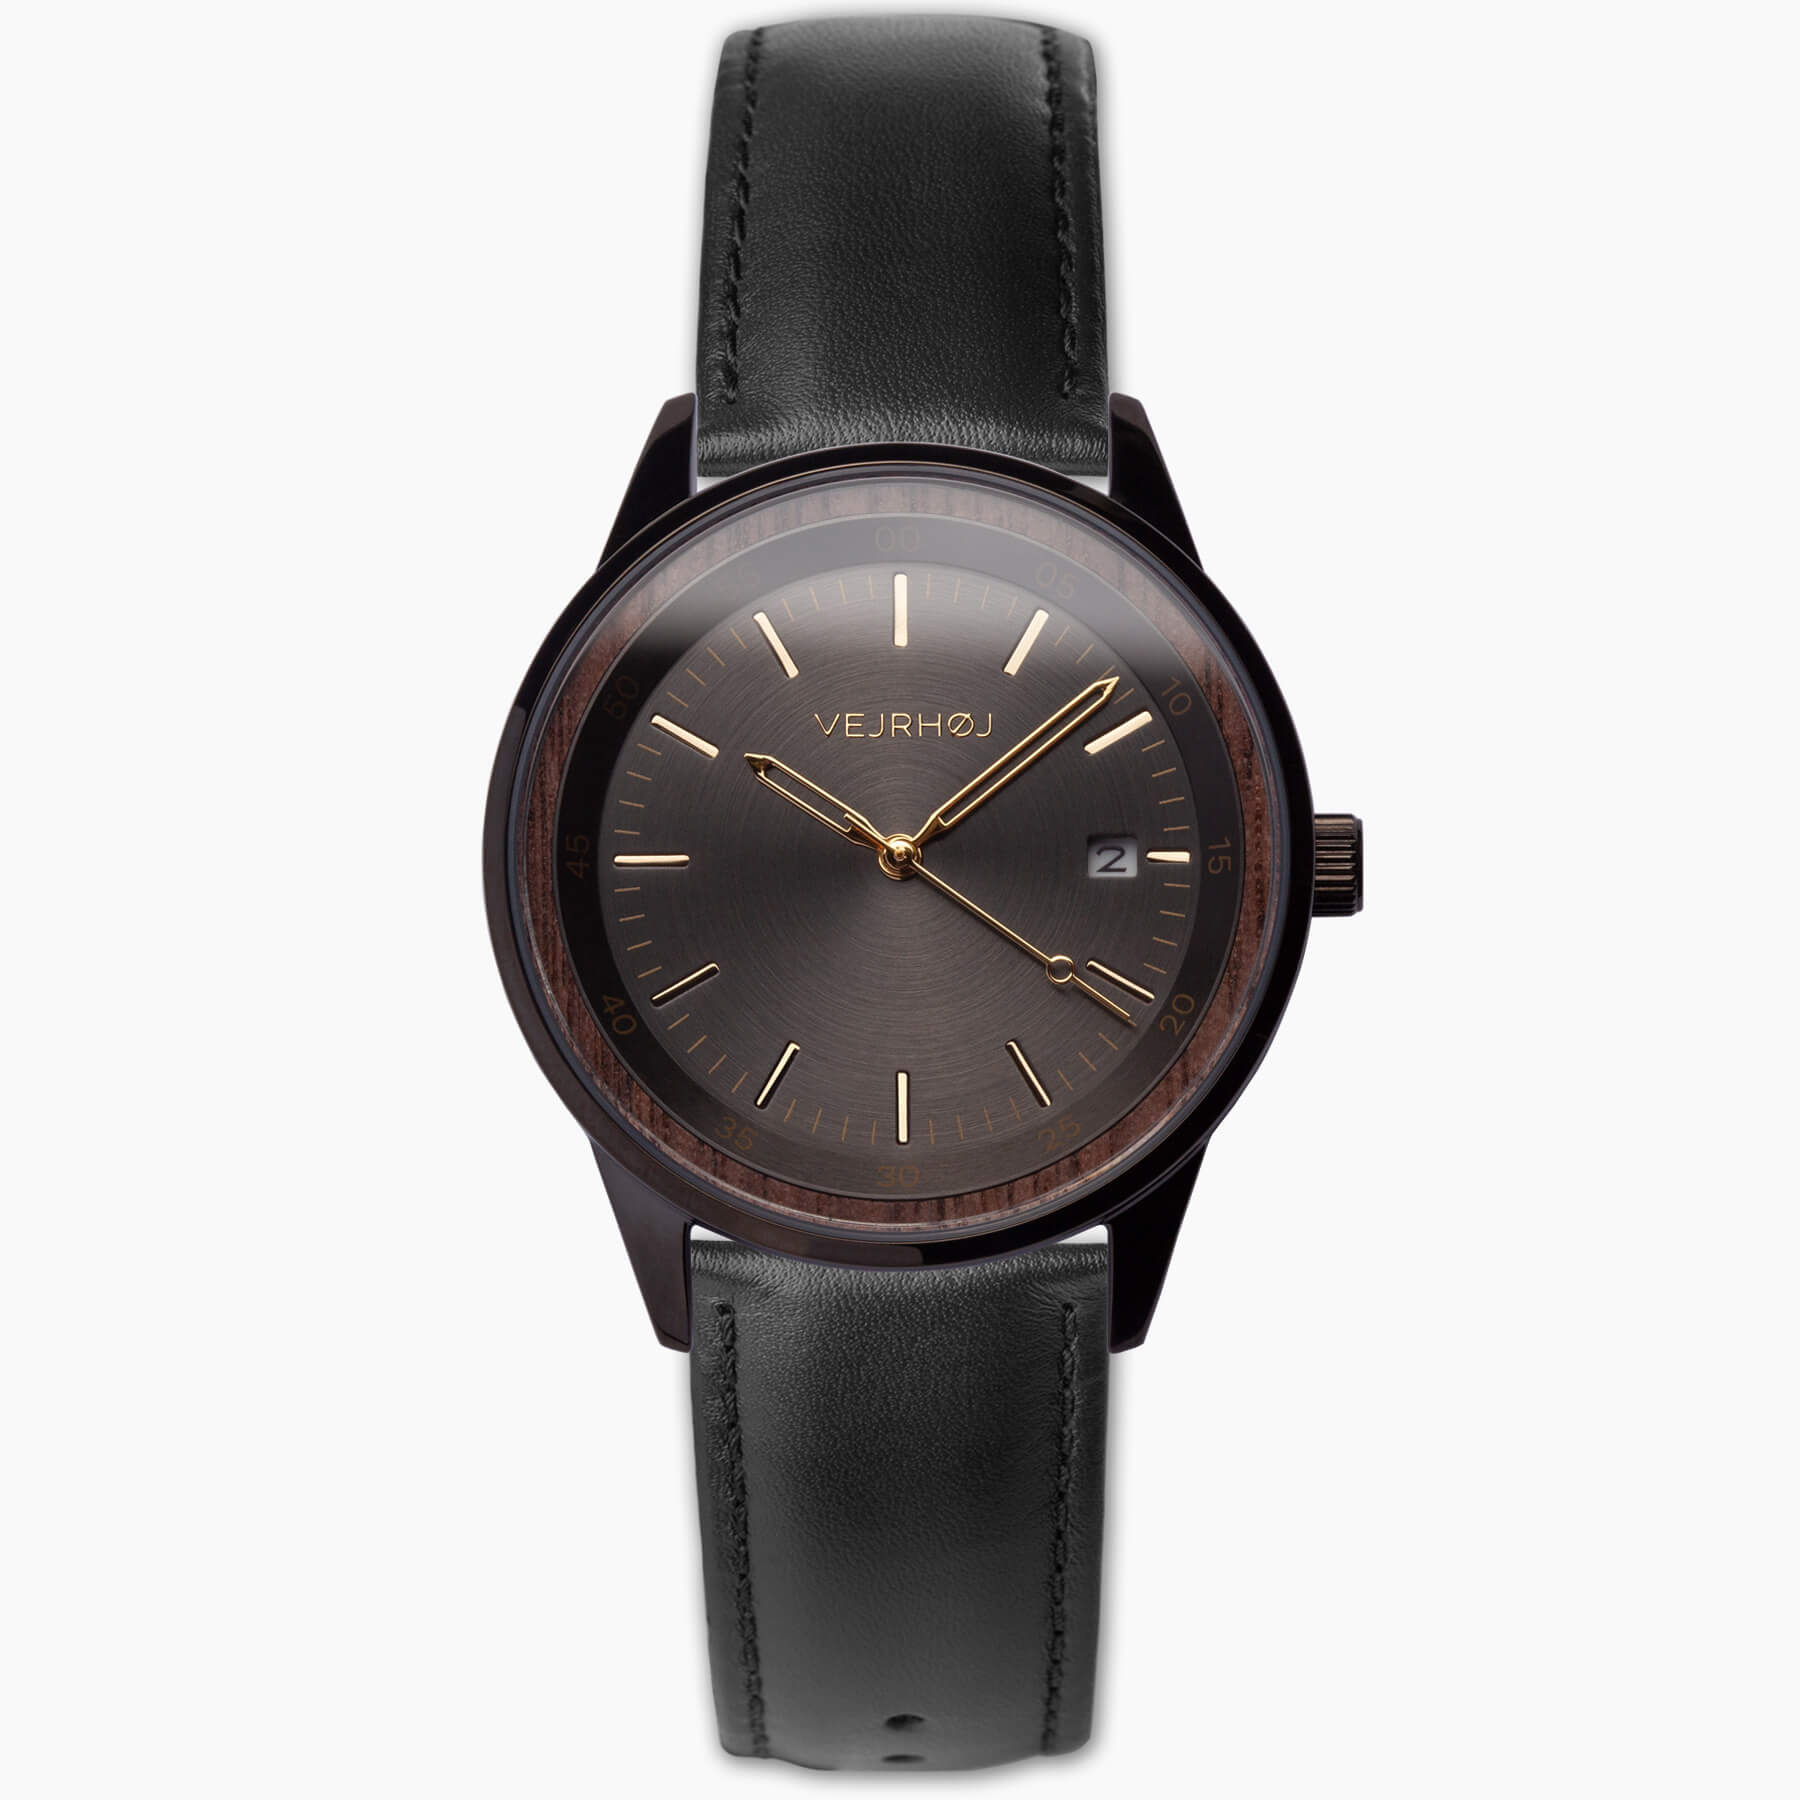 Black automatic watch with golden hands and the VEJRHØJ logo